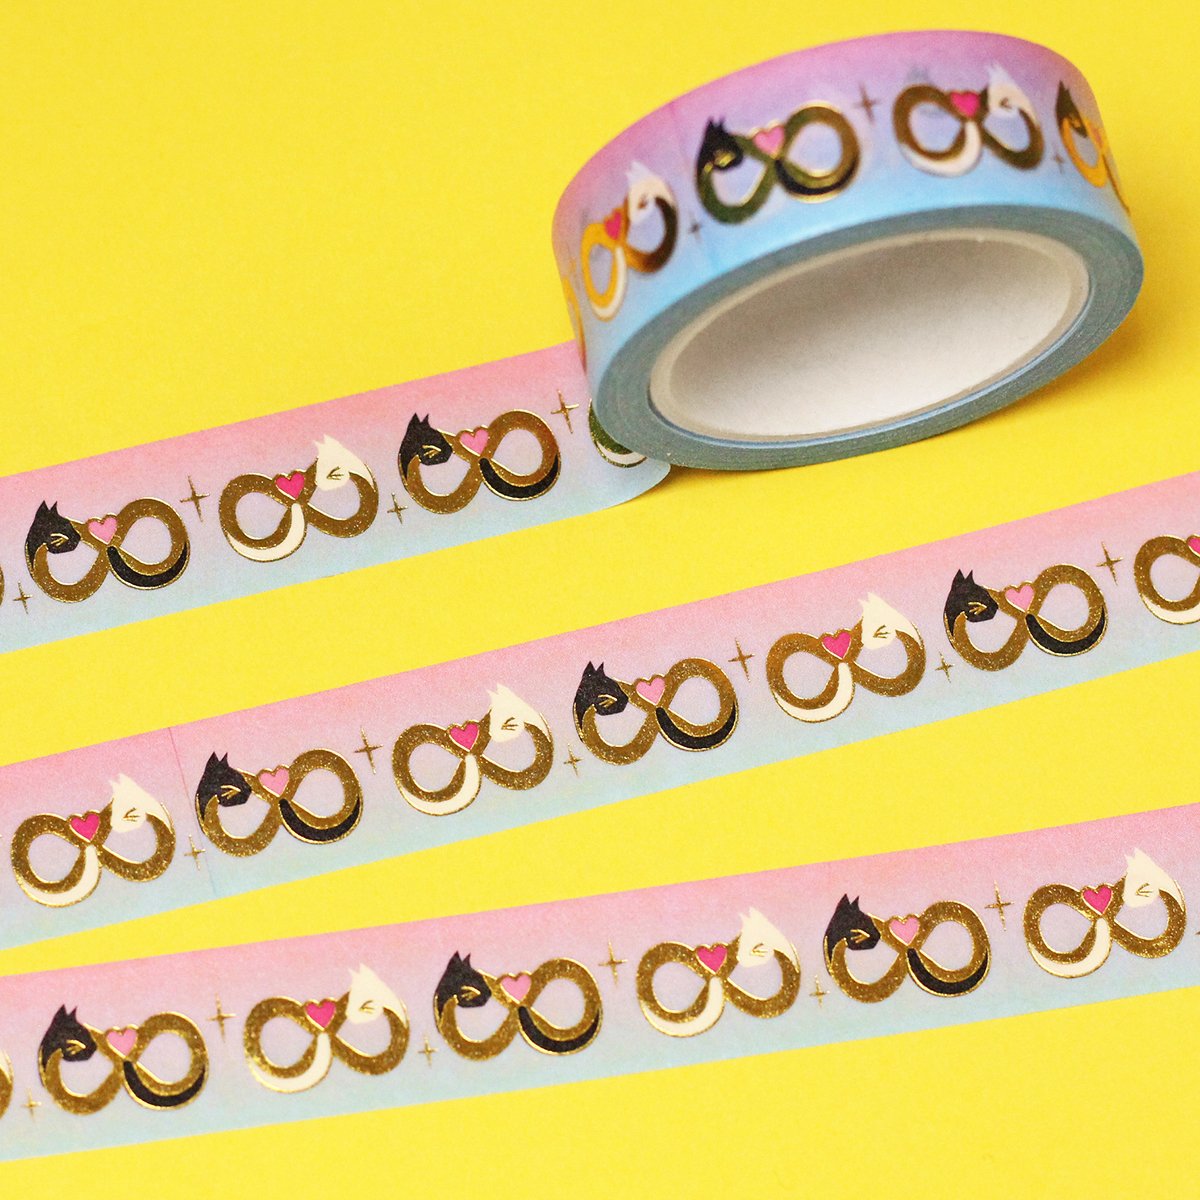 Infinity symbol cats Washi Tape - gold foil - 15mm by 10m